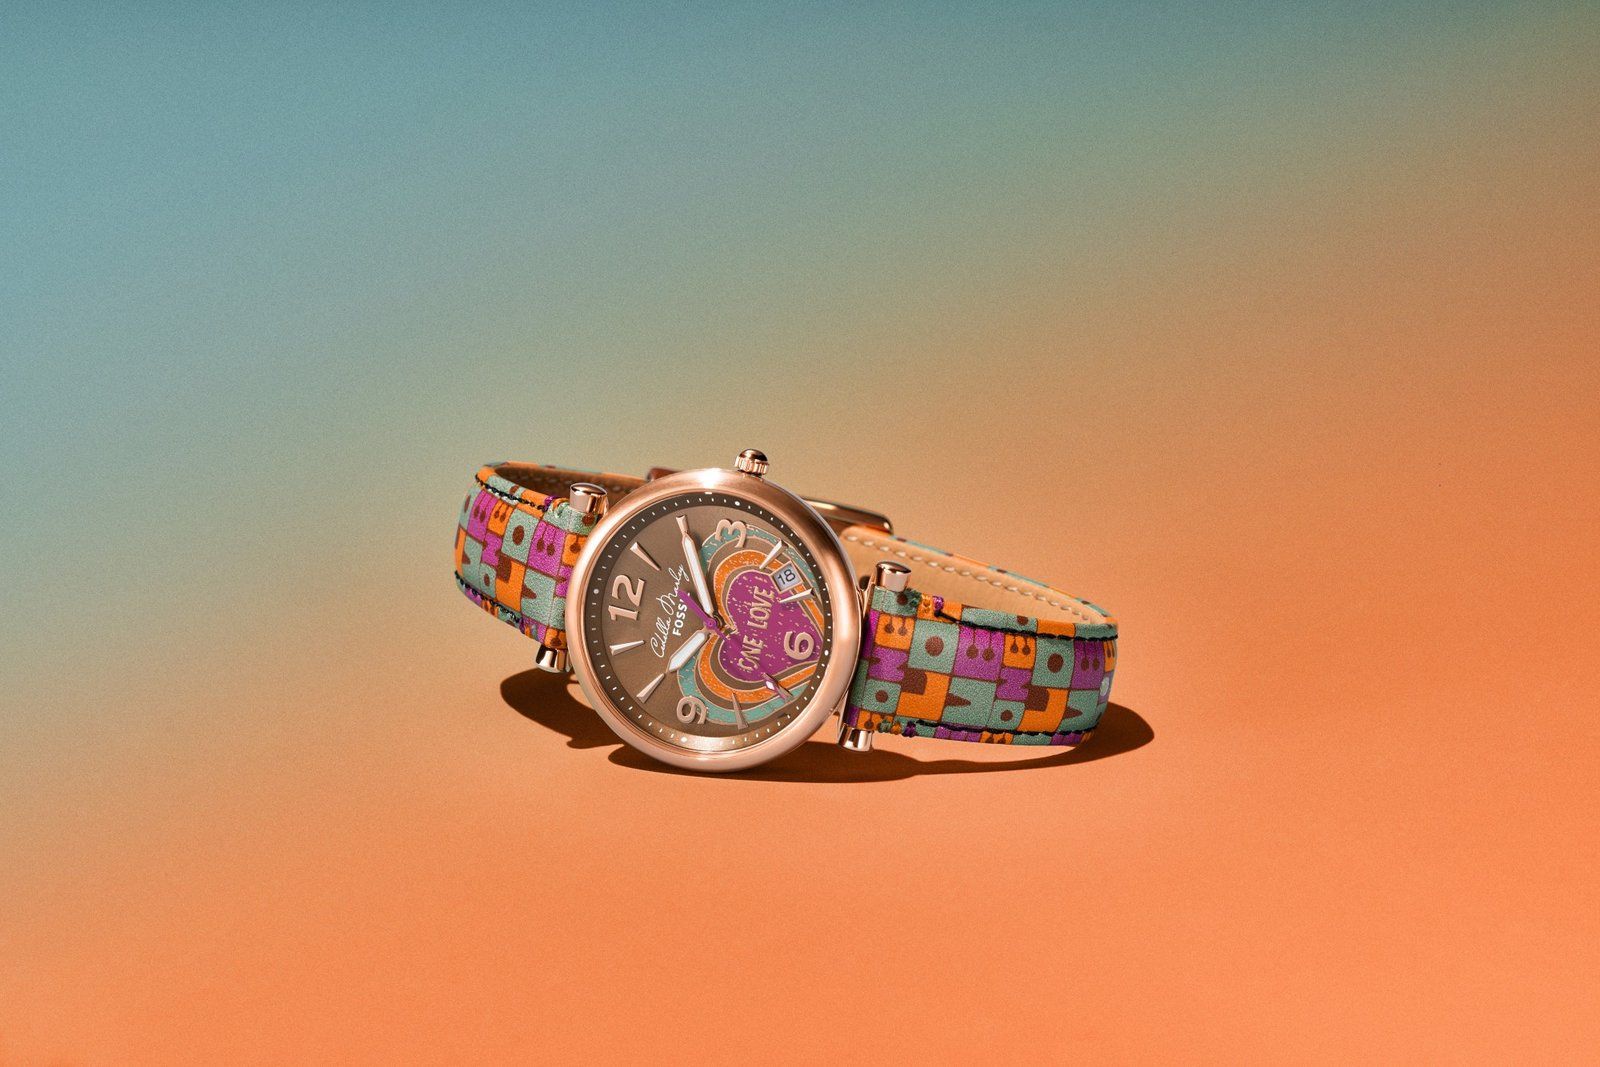 The set includes a multi-colored, replaceable watch strap in addition to the 35MM rose gold-tone watch and bracelet. 